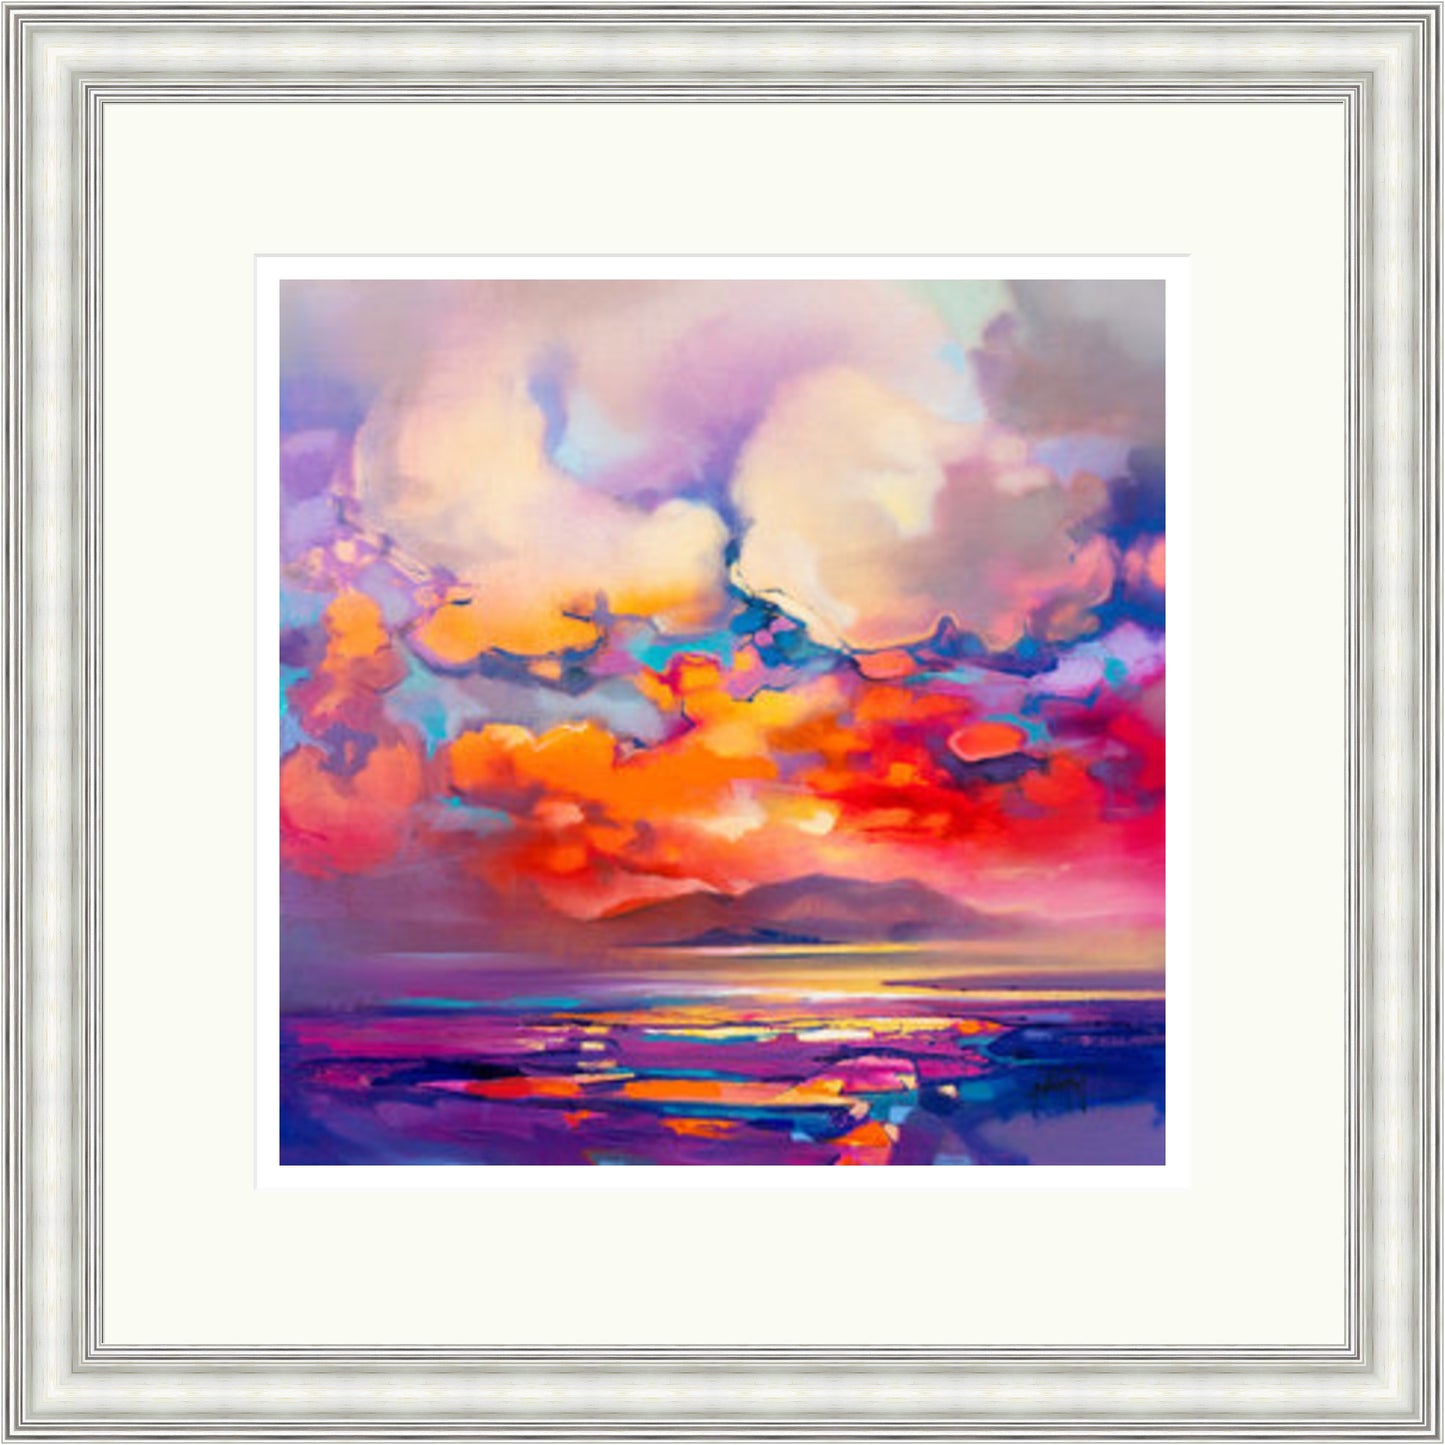 Mull Emerges (Limited Edition) by Scott Naismith